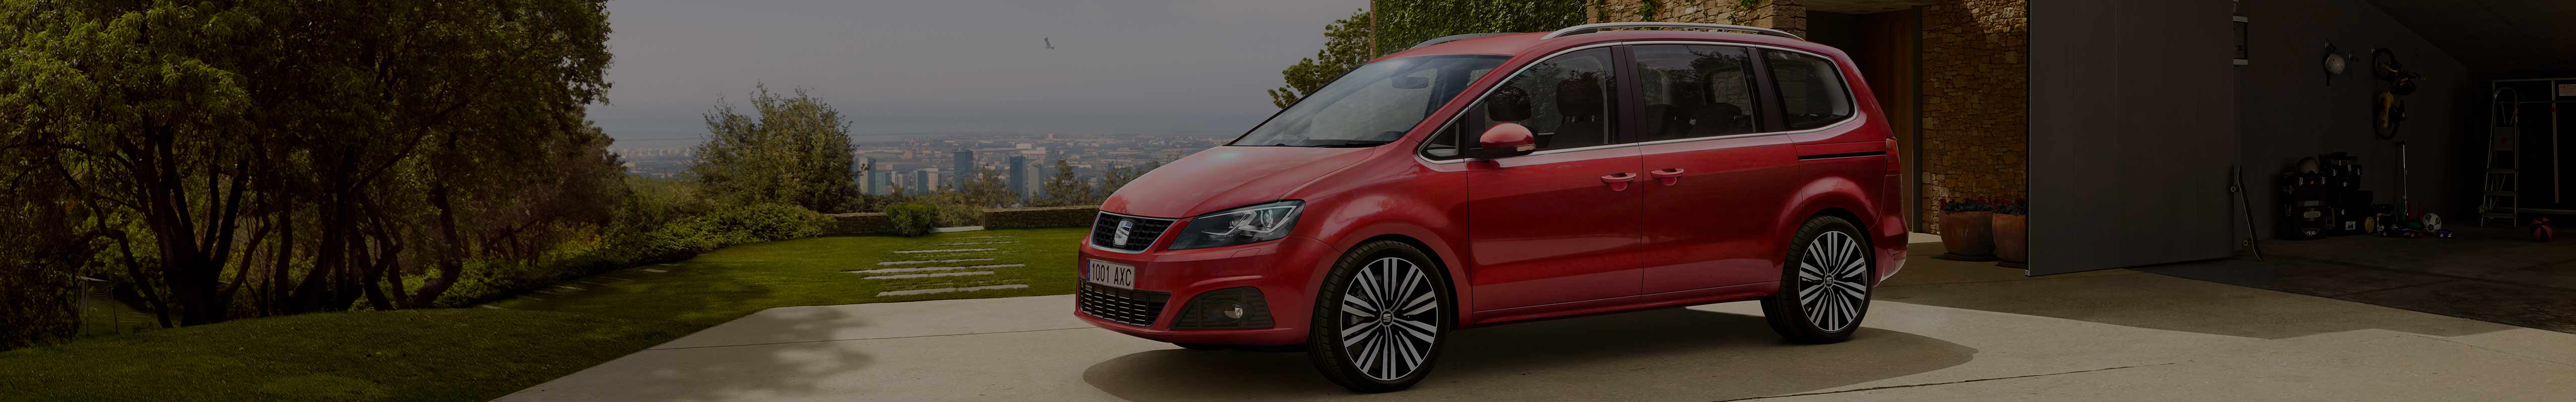 SEAT Family cars – SEAT Alhambra 7 seater MPV for family – Man opening the boot hands free technology